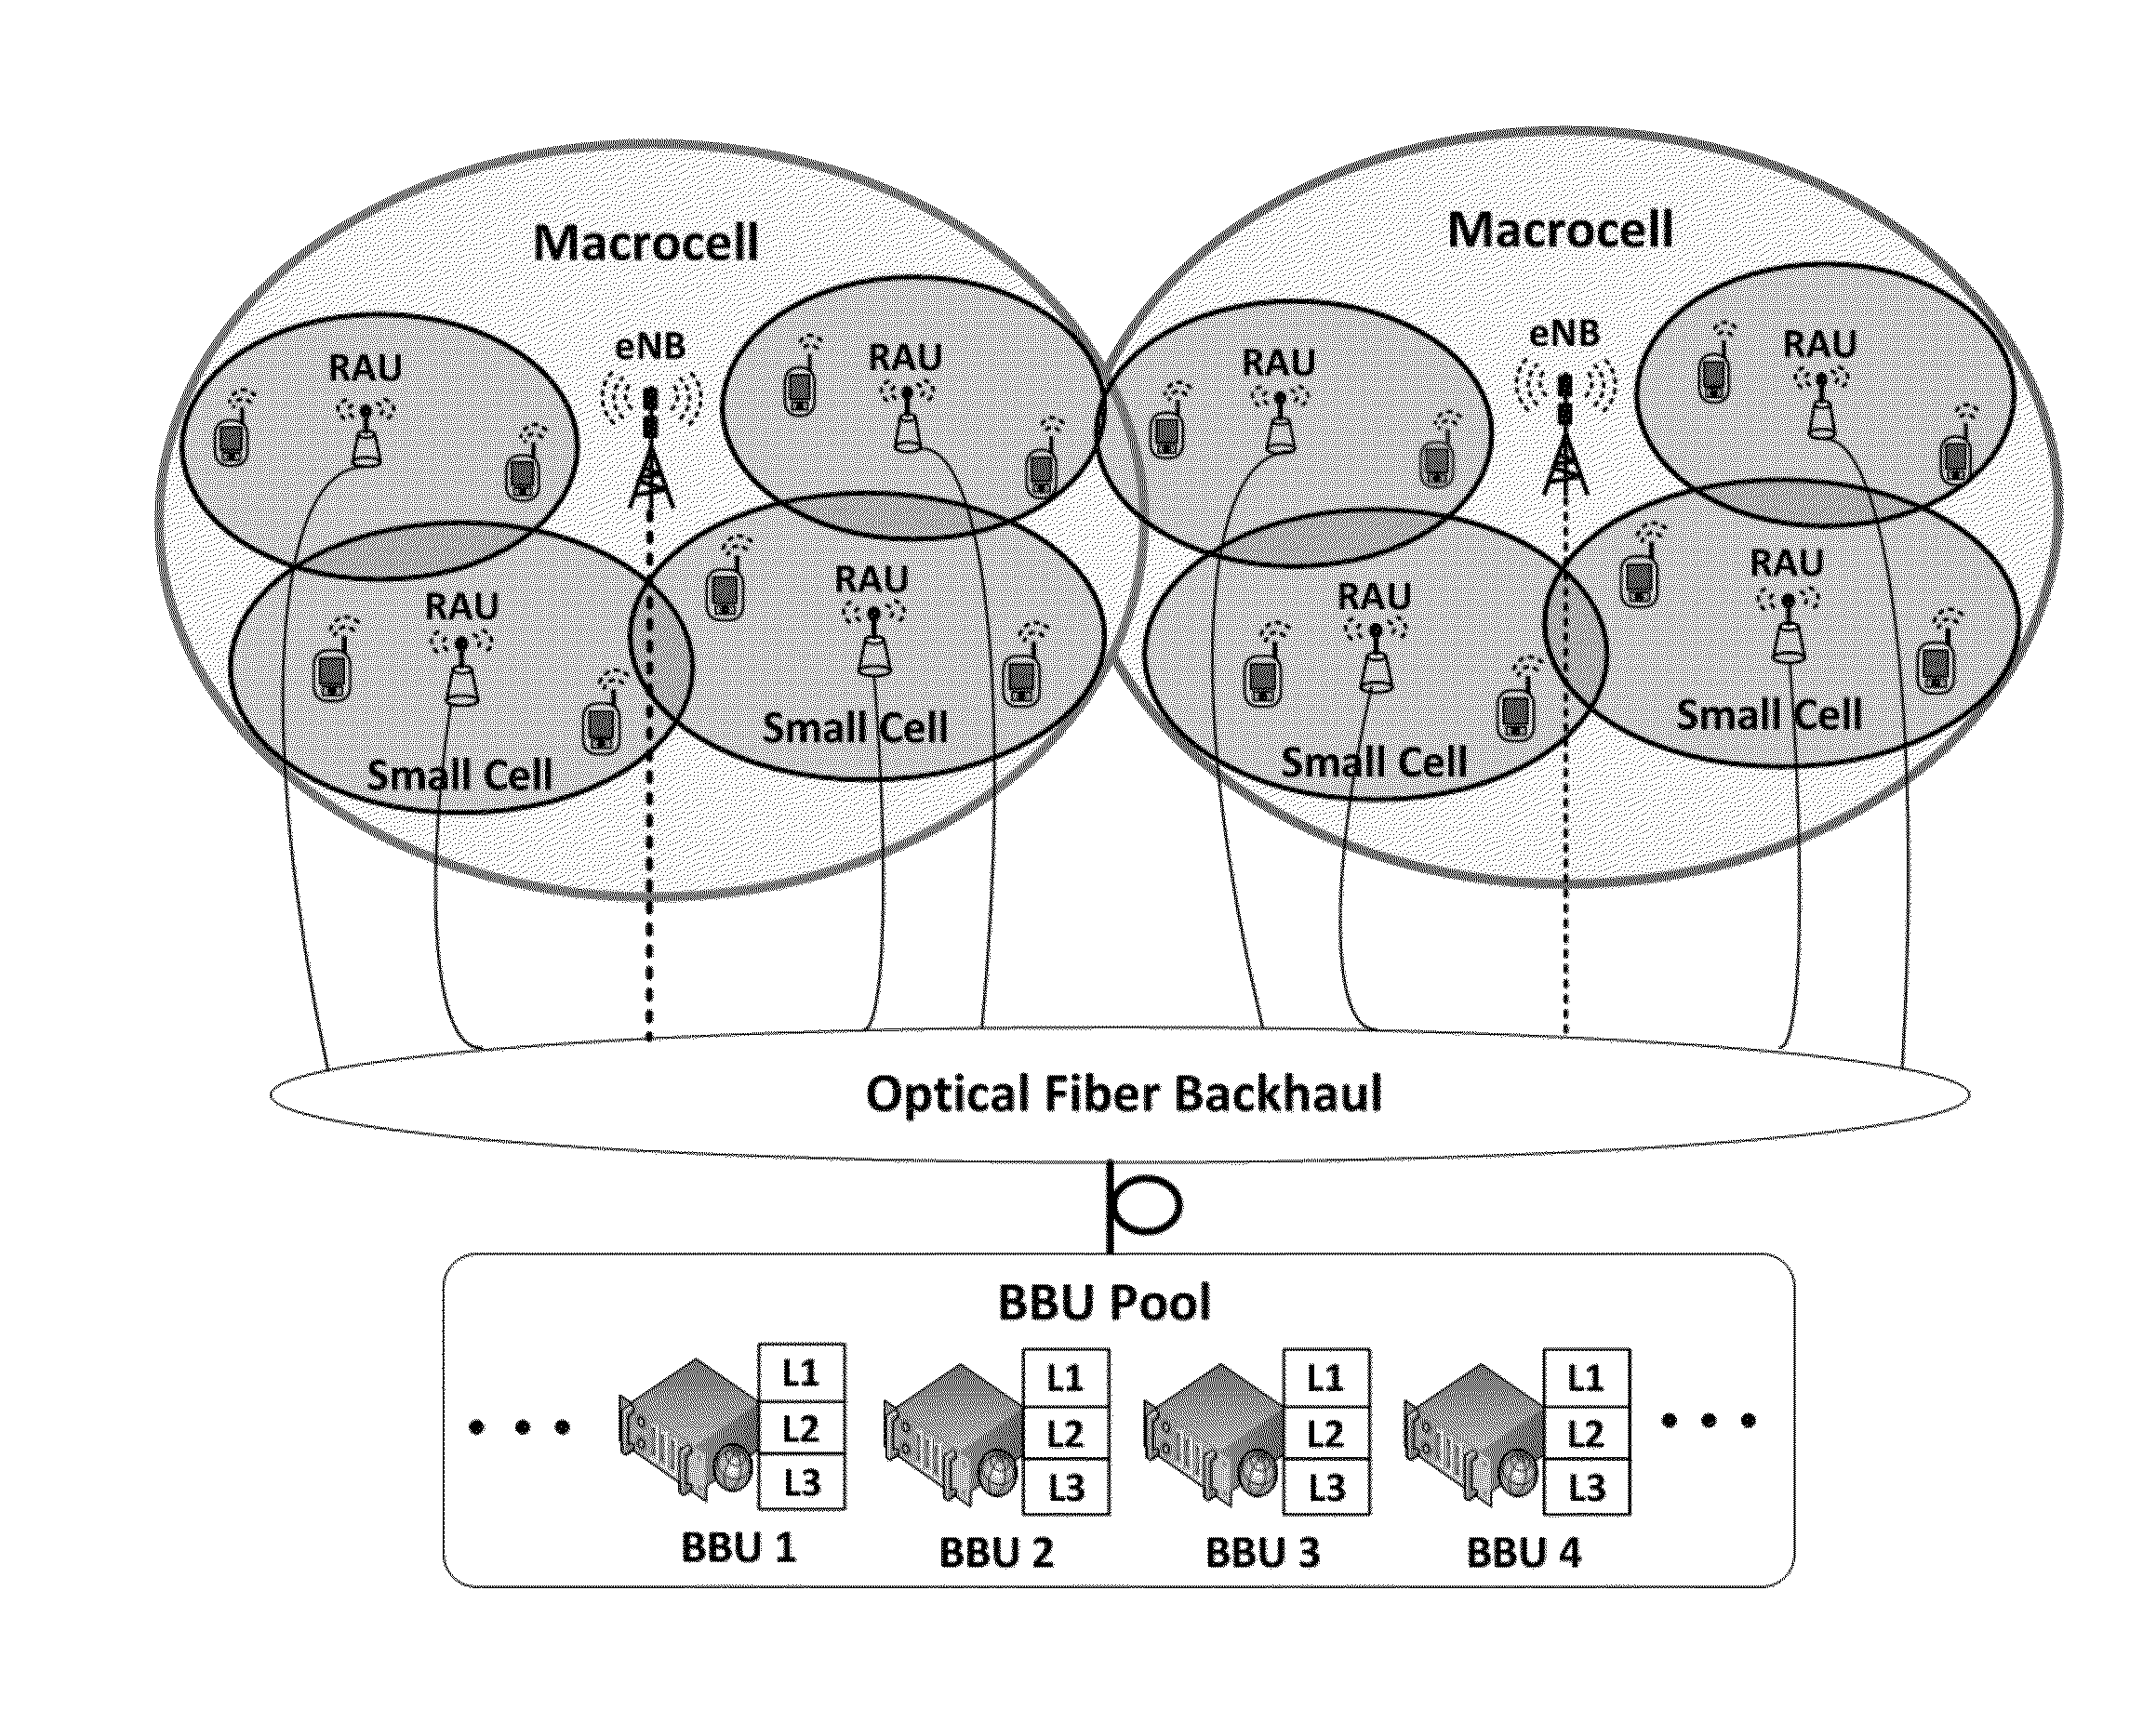 Cloud-based Radio Access Network for Small Cells